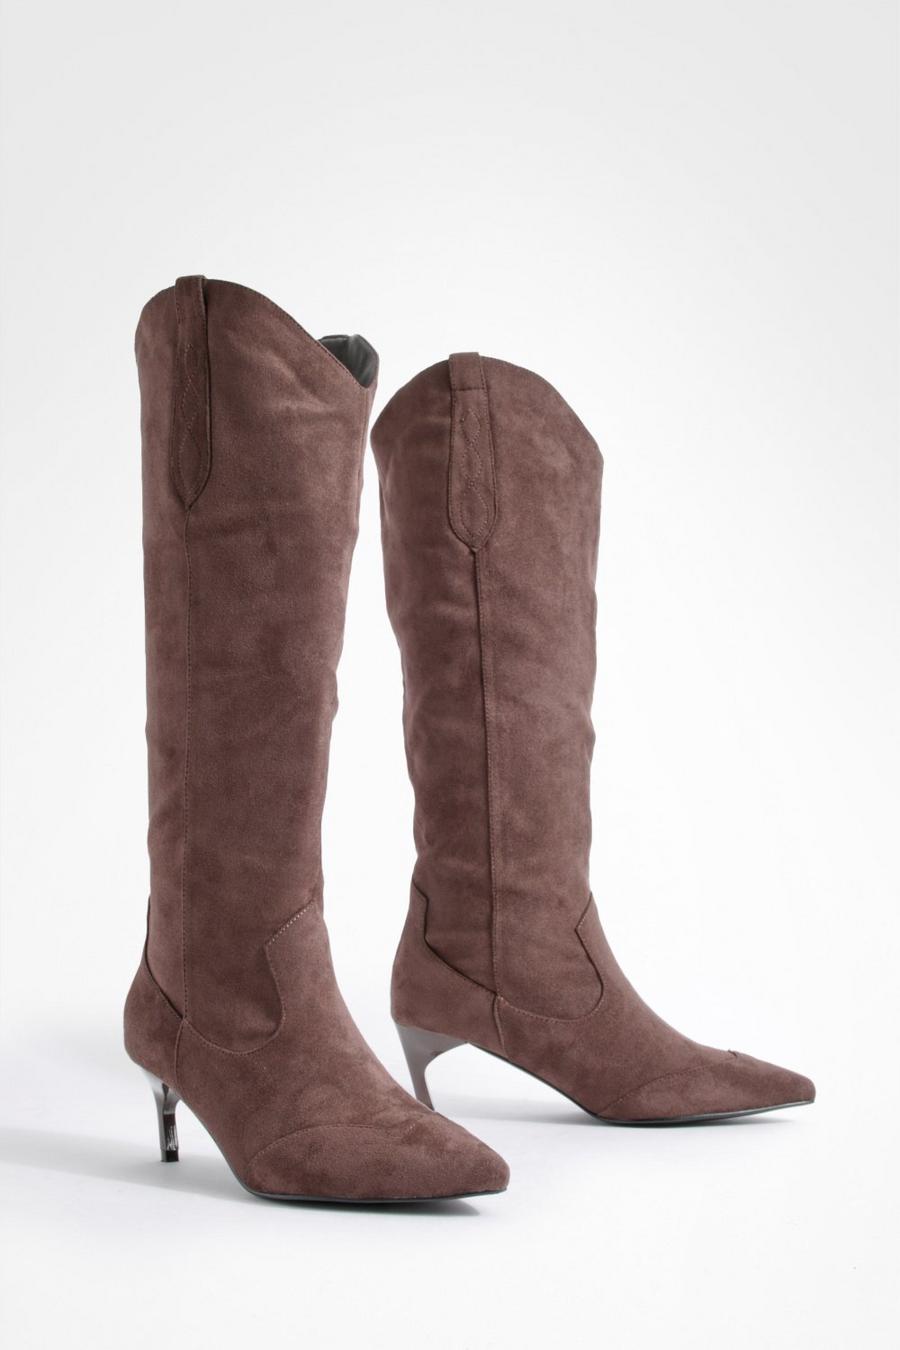 Chocolate marrón Western Detail Low Knee High Boots